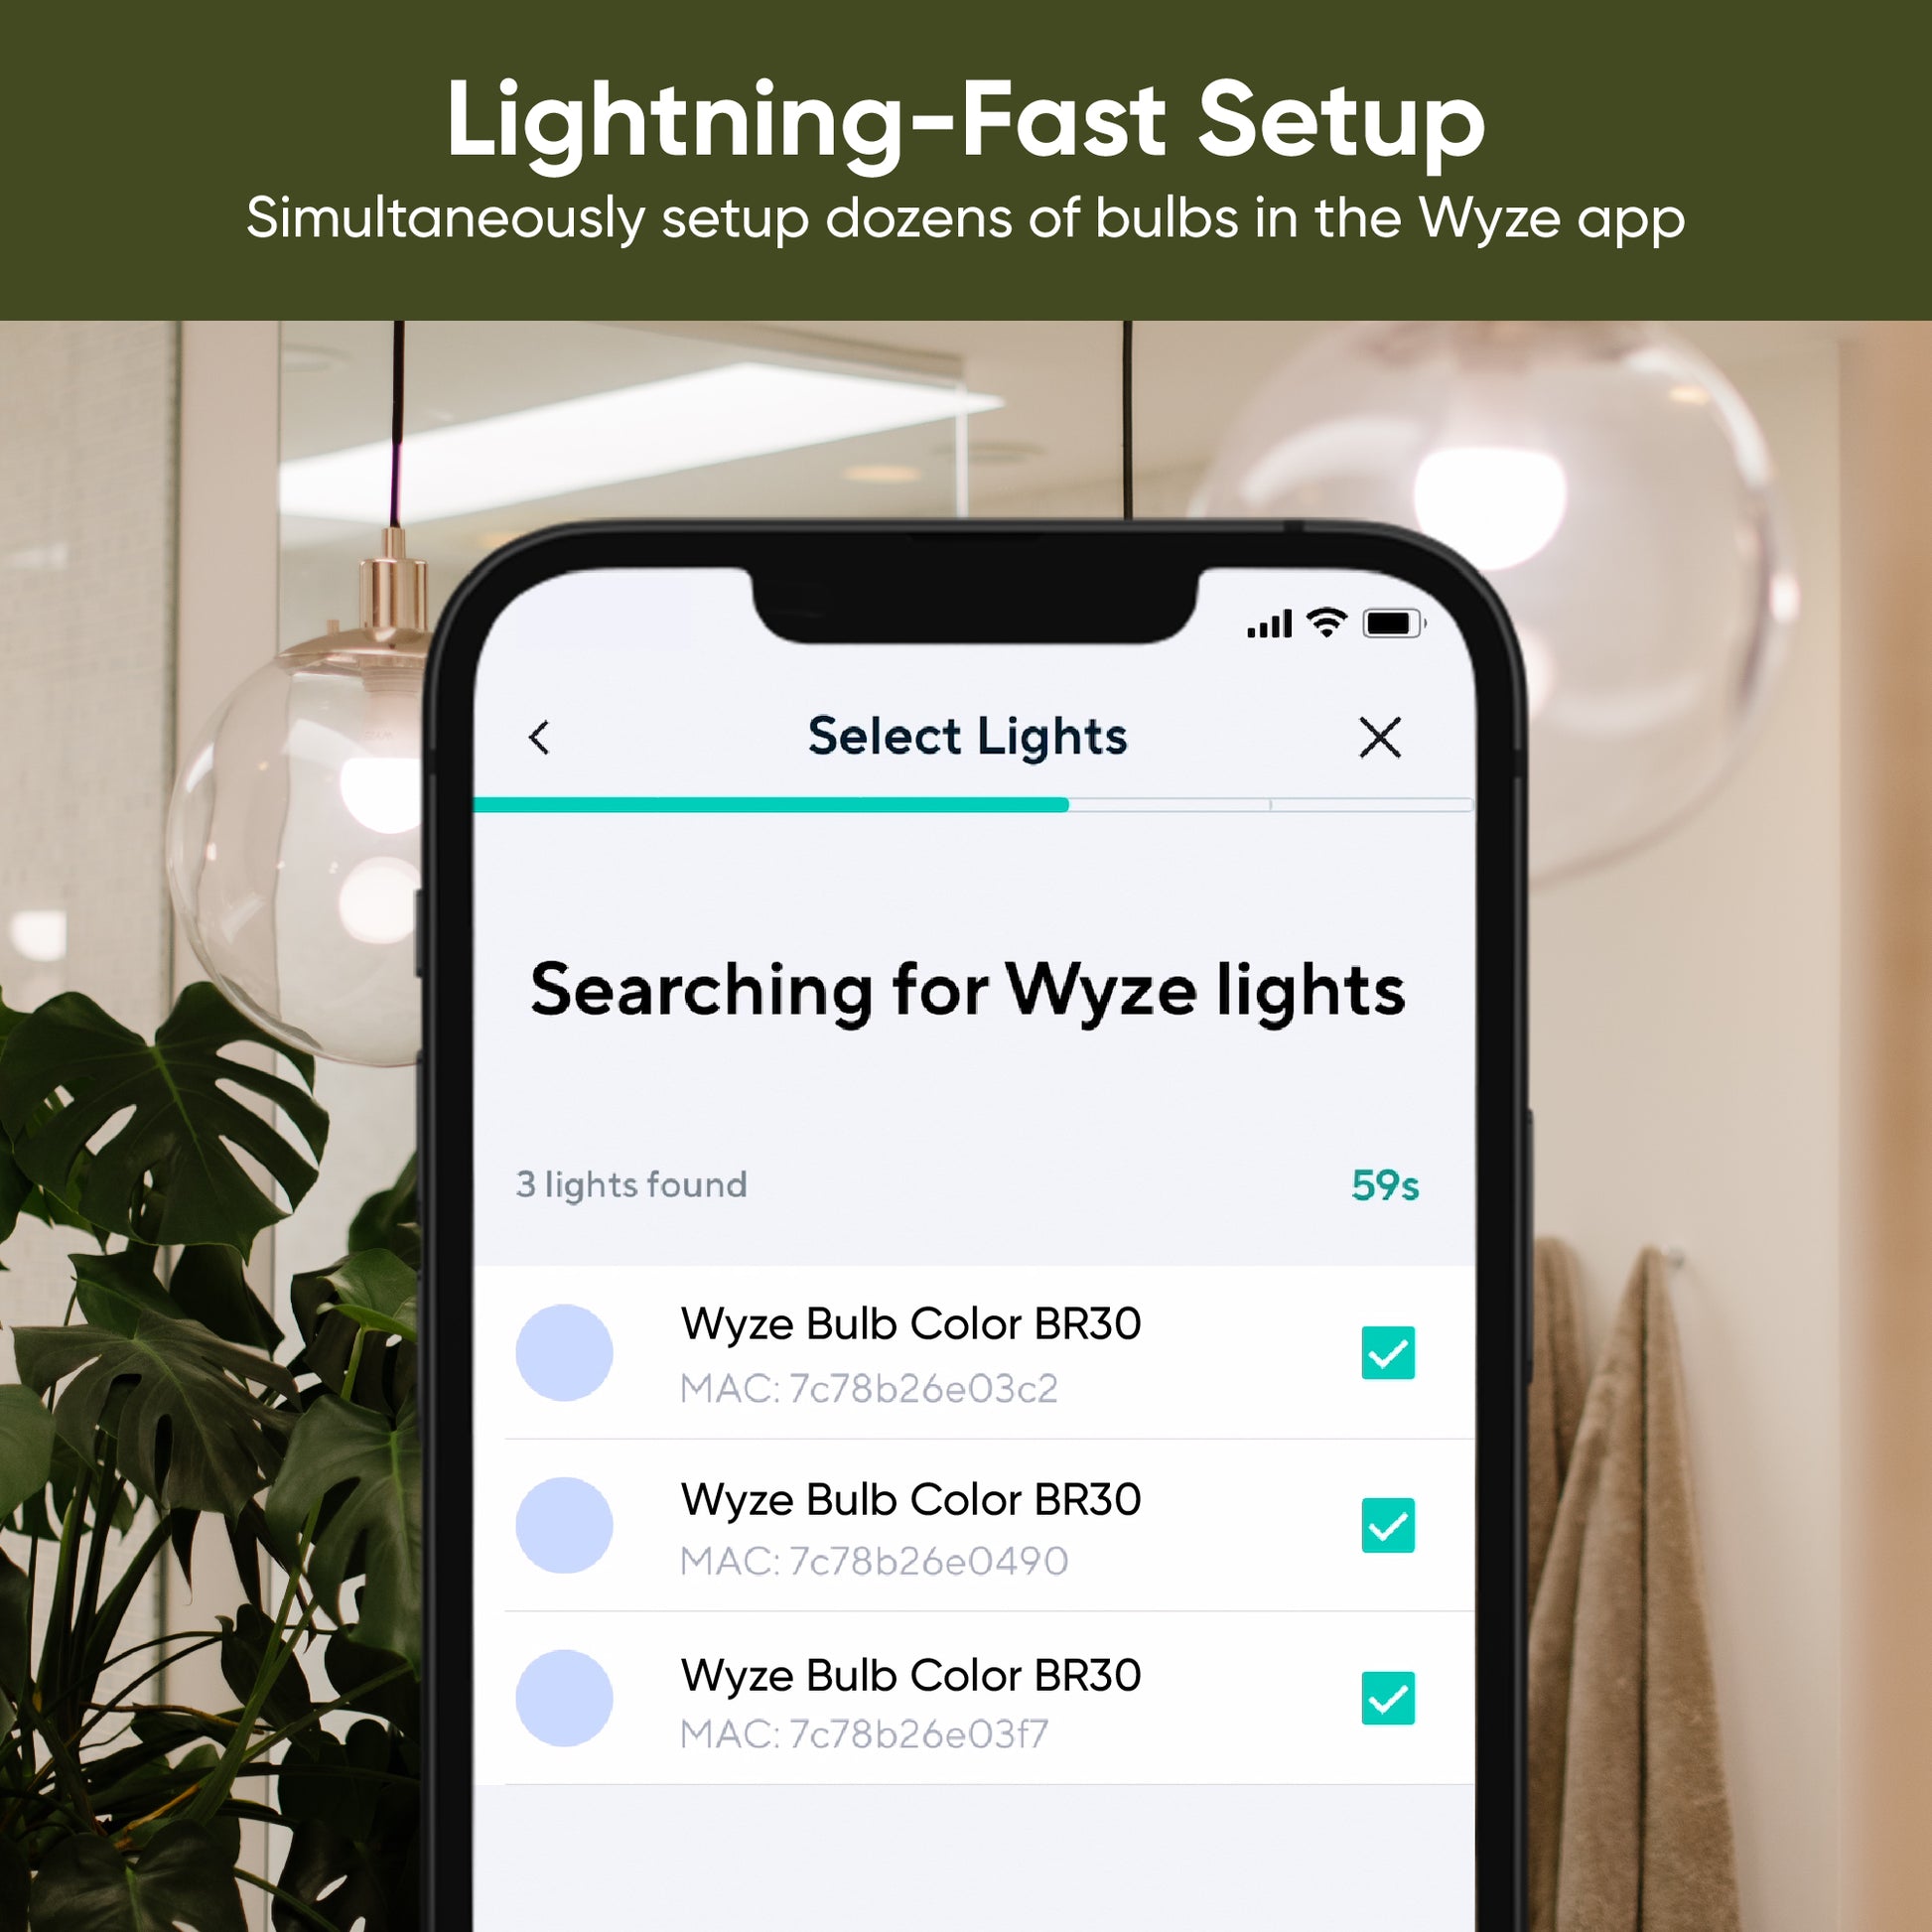 Close up of phone with Wyze App open on the screen. White text overlay that says "Lightning-Fast Setup."